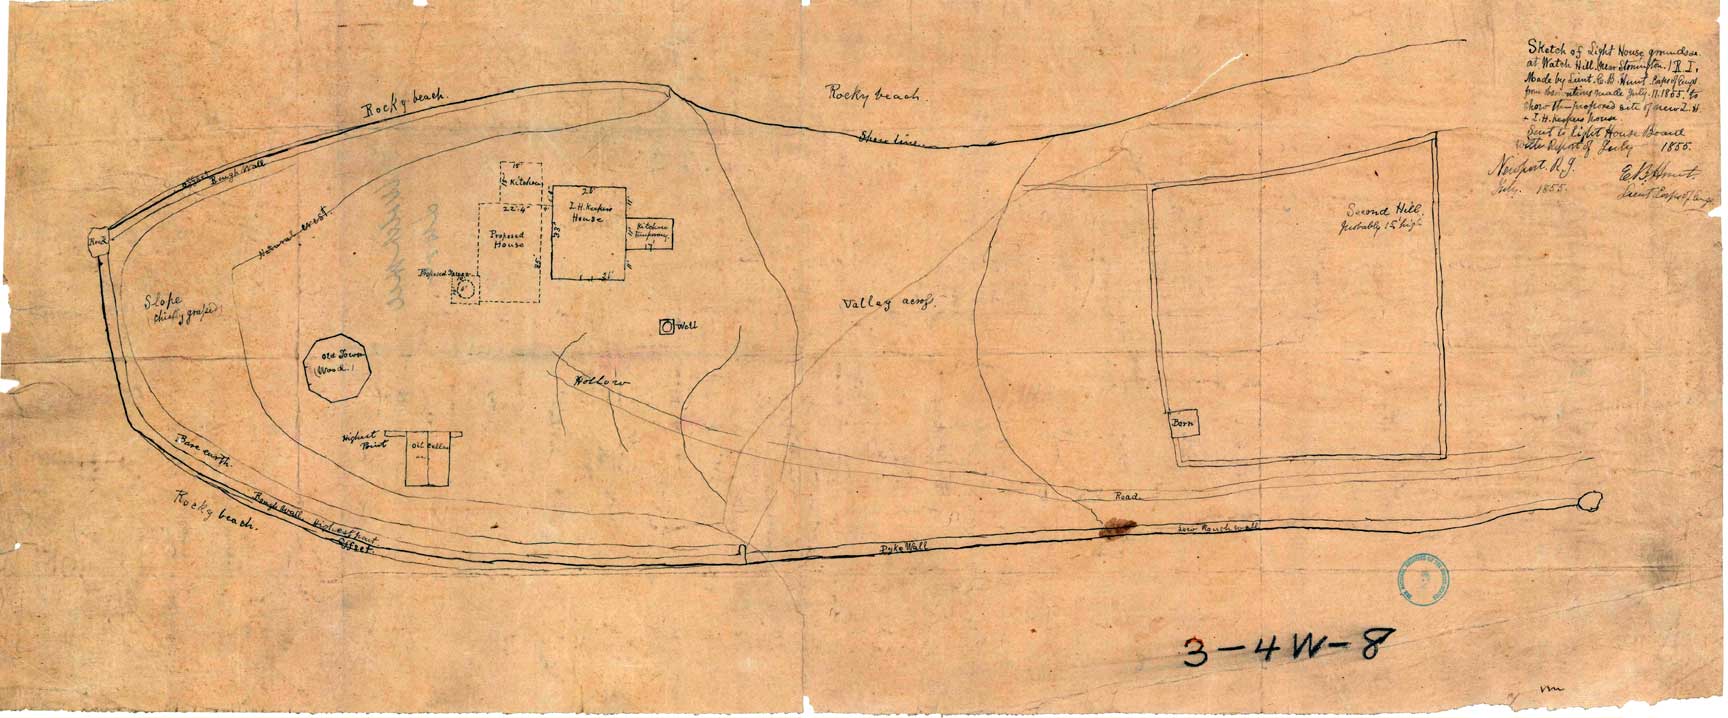 1855 Sketch of Watch Hill Lighthouse Grounds